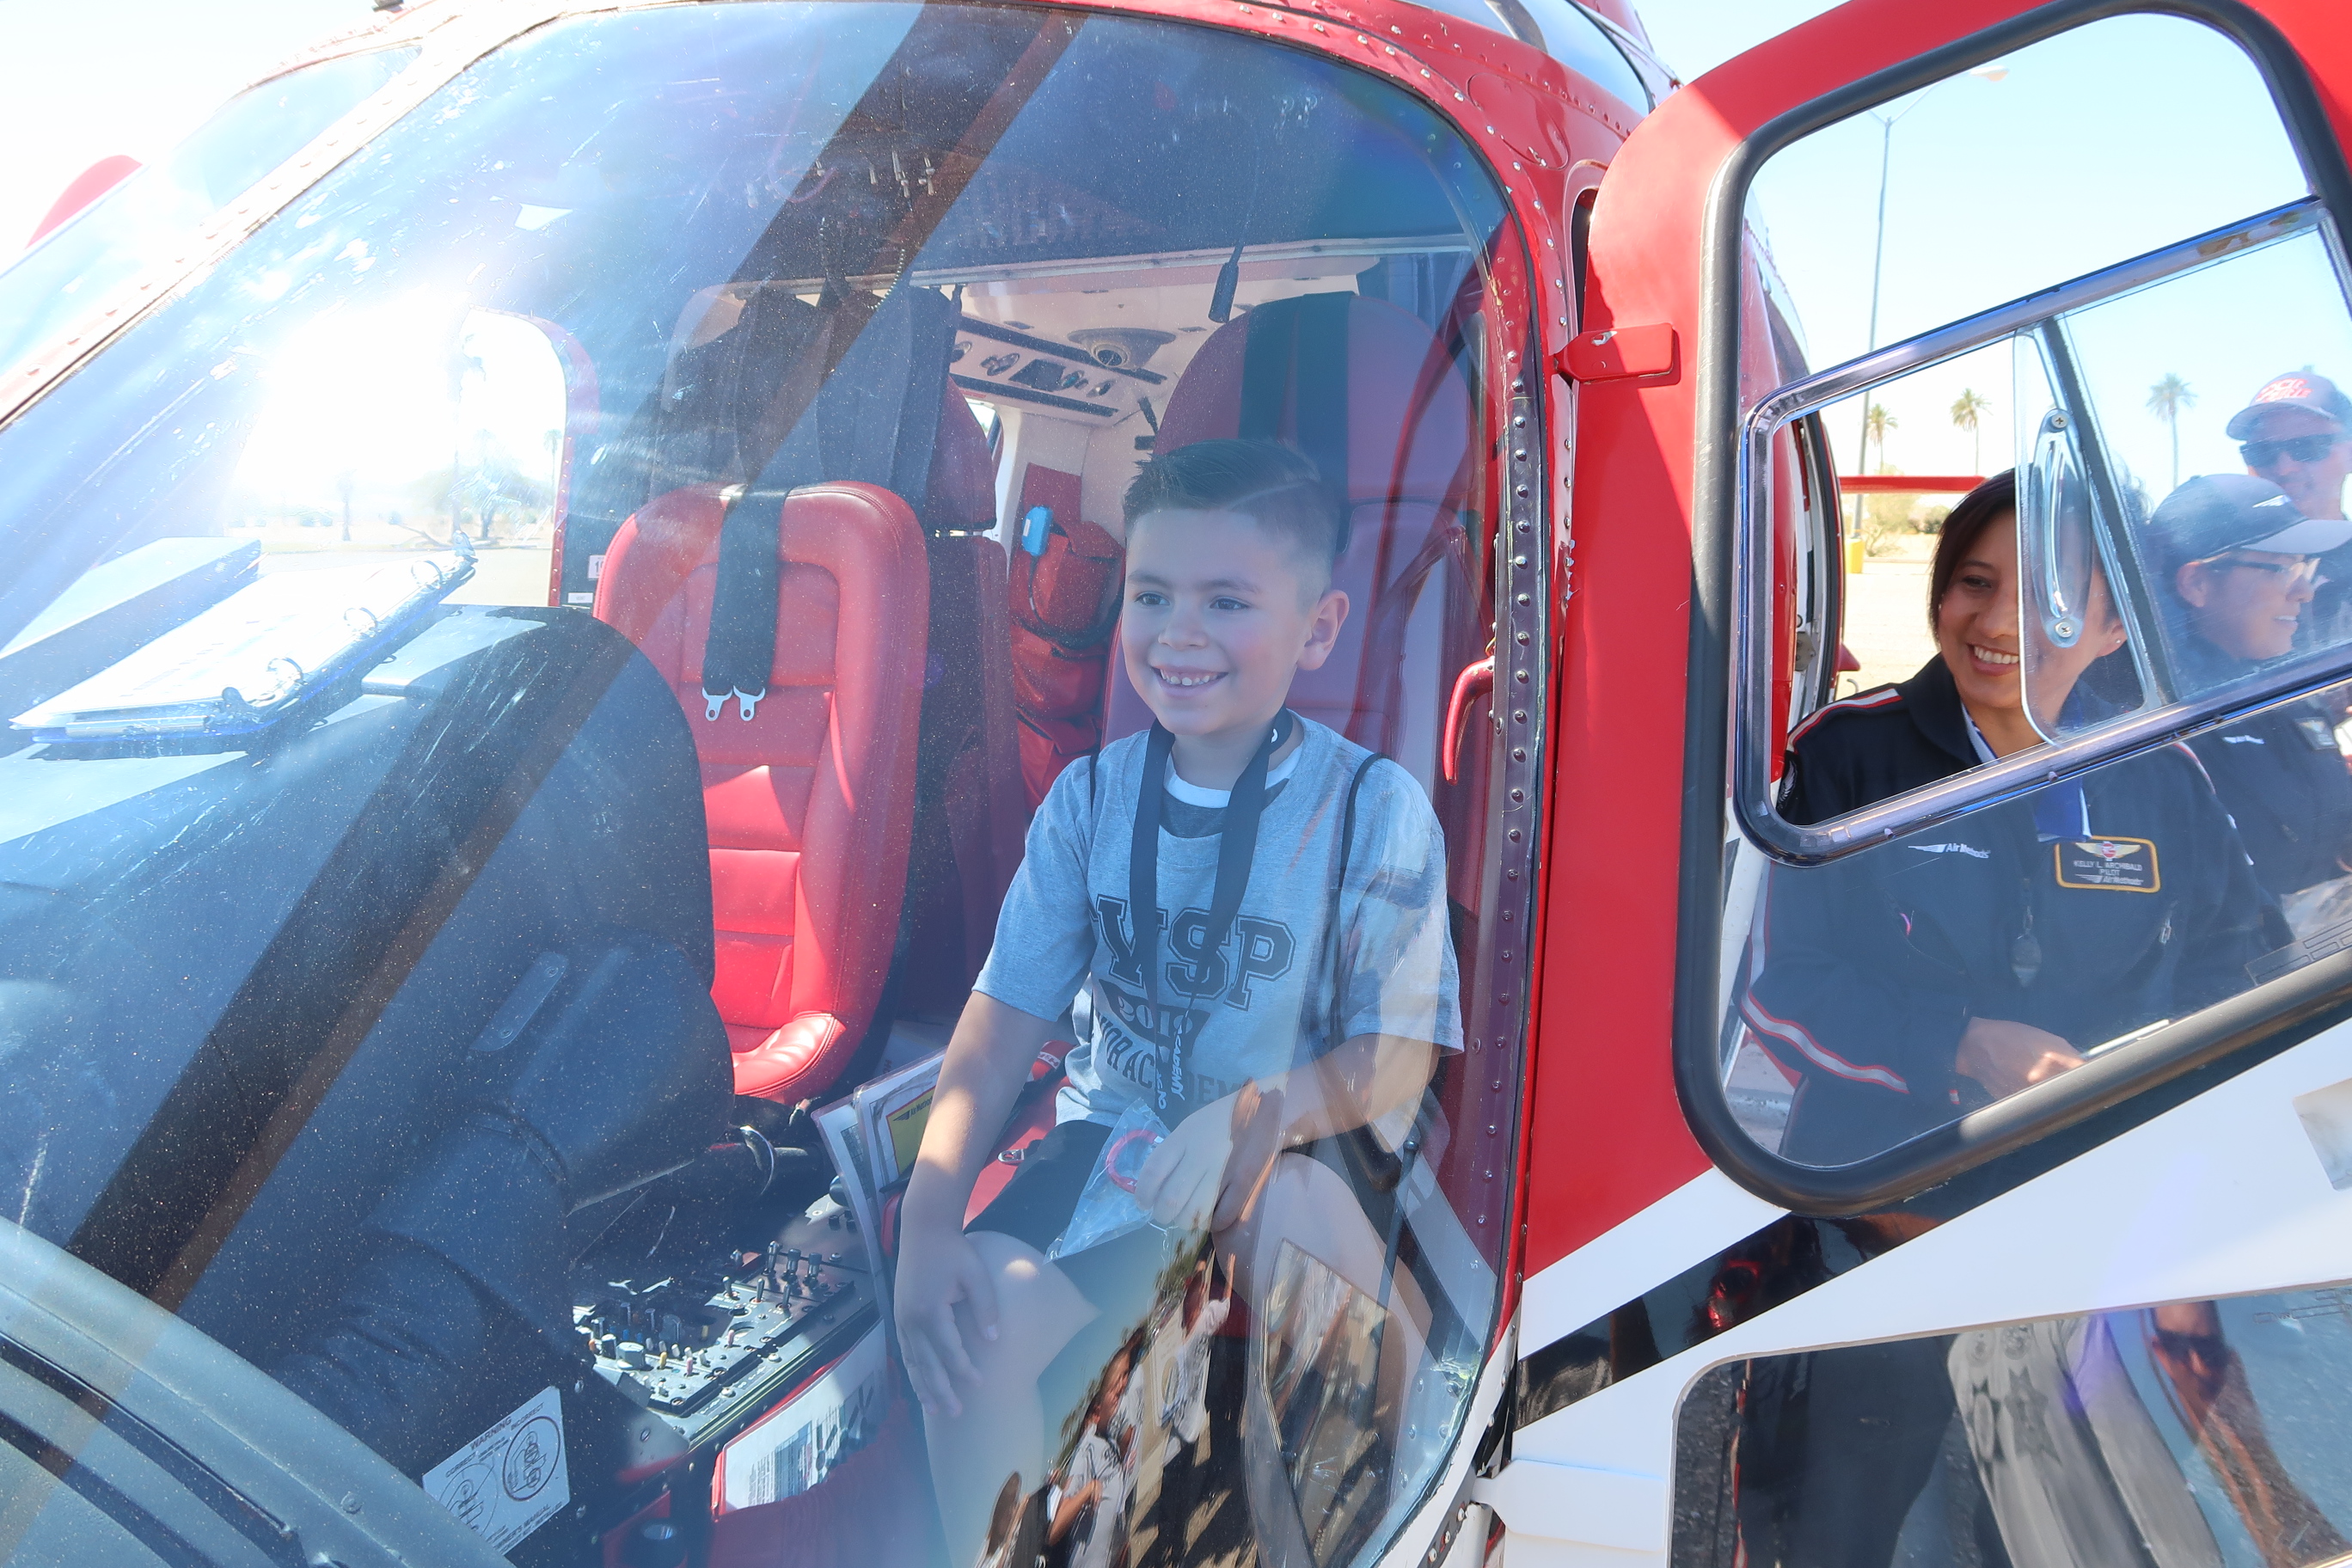 Smiling young boy sits in helicopter seat.